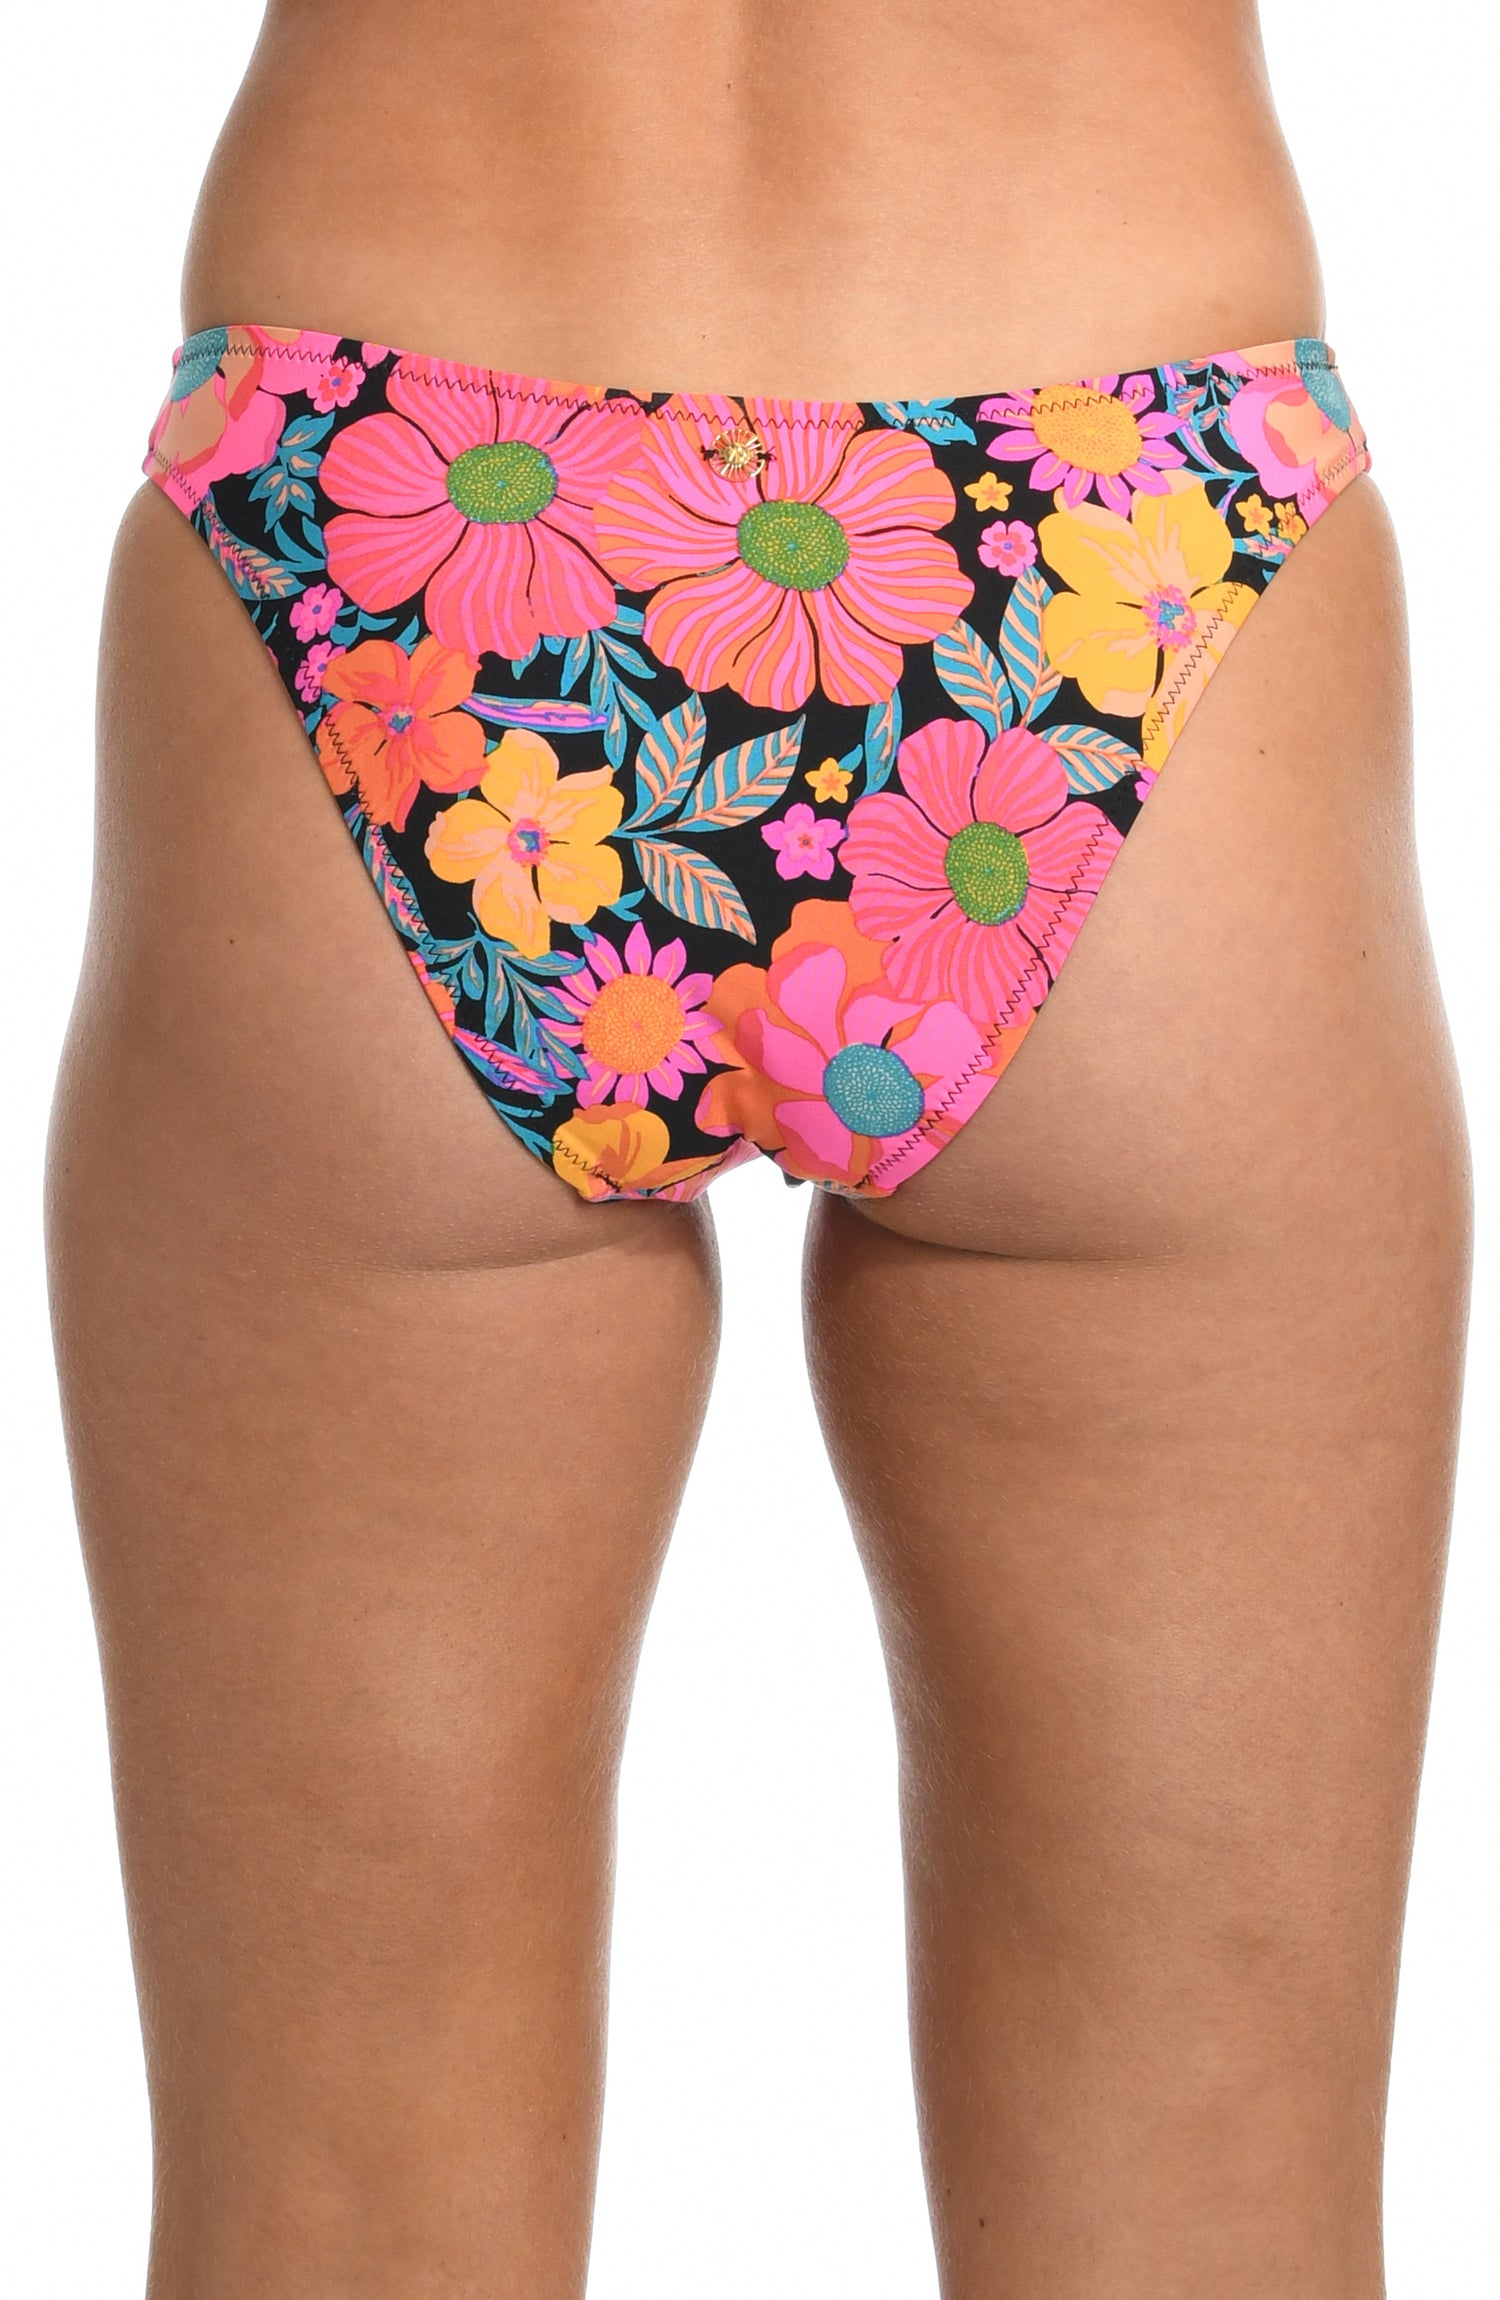 Model is wearing a yellow and pink multicolored retro inspired flower printed french cut bikini swimsuit bottom from our Flower Power collection.